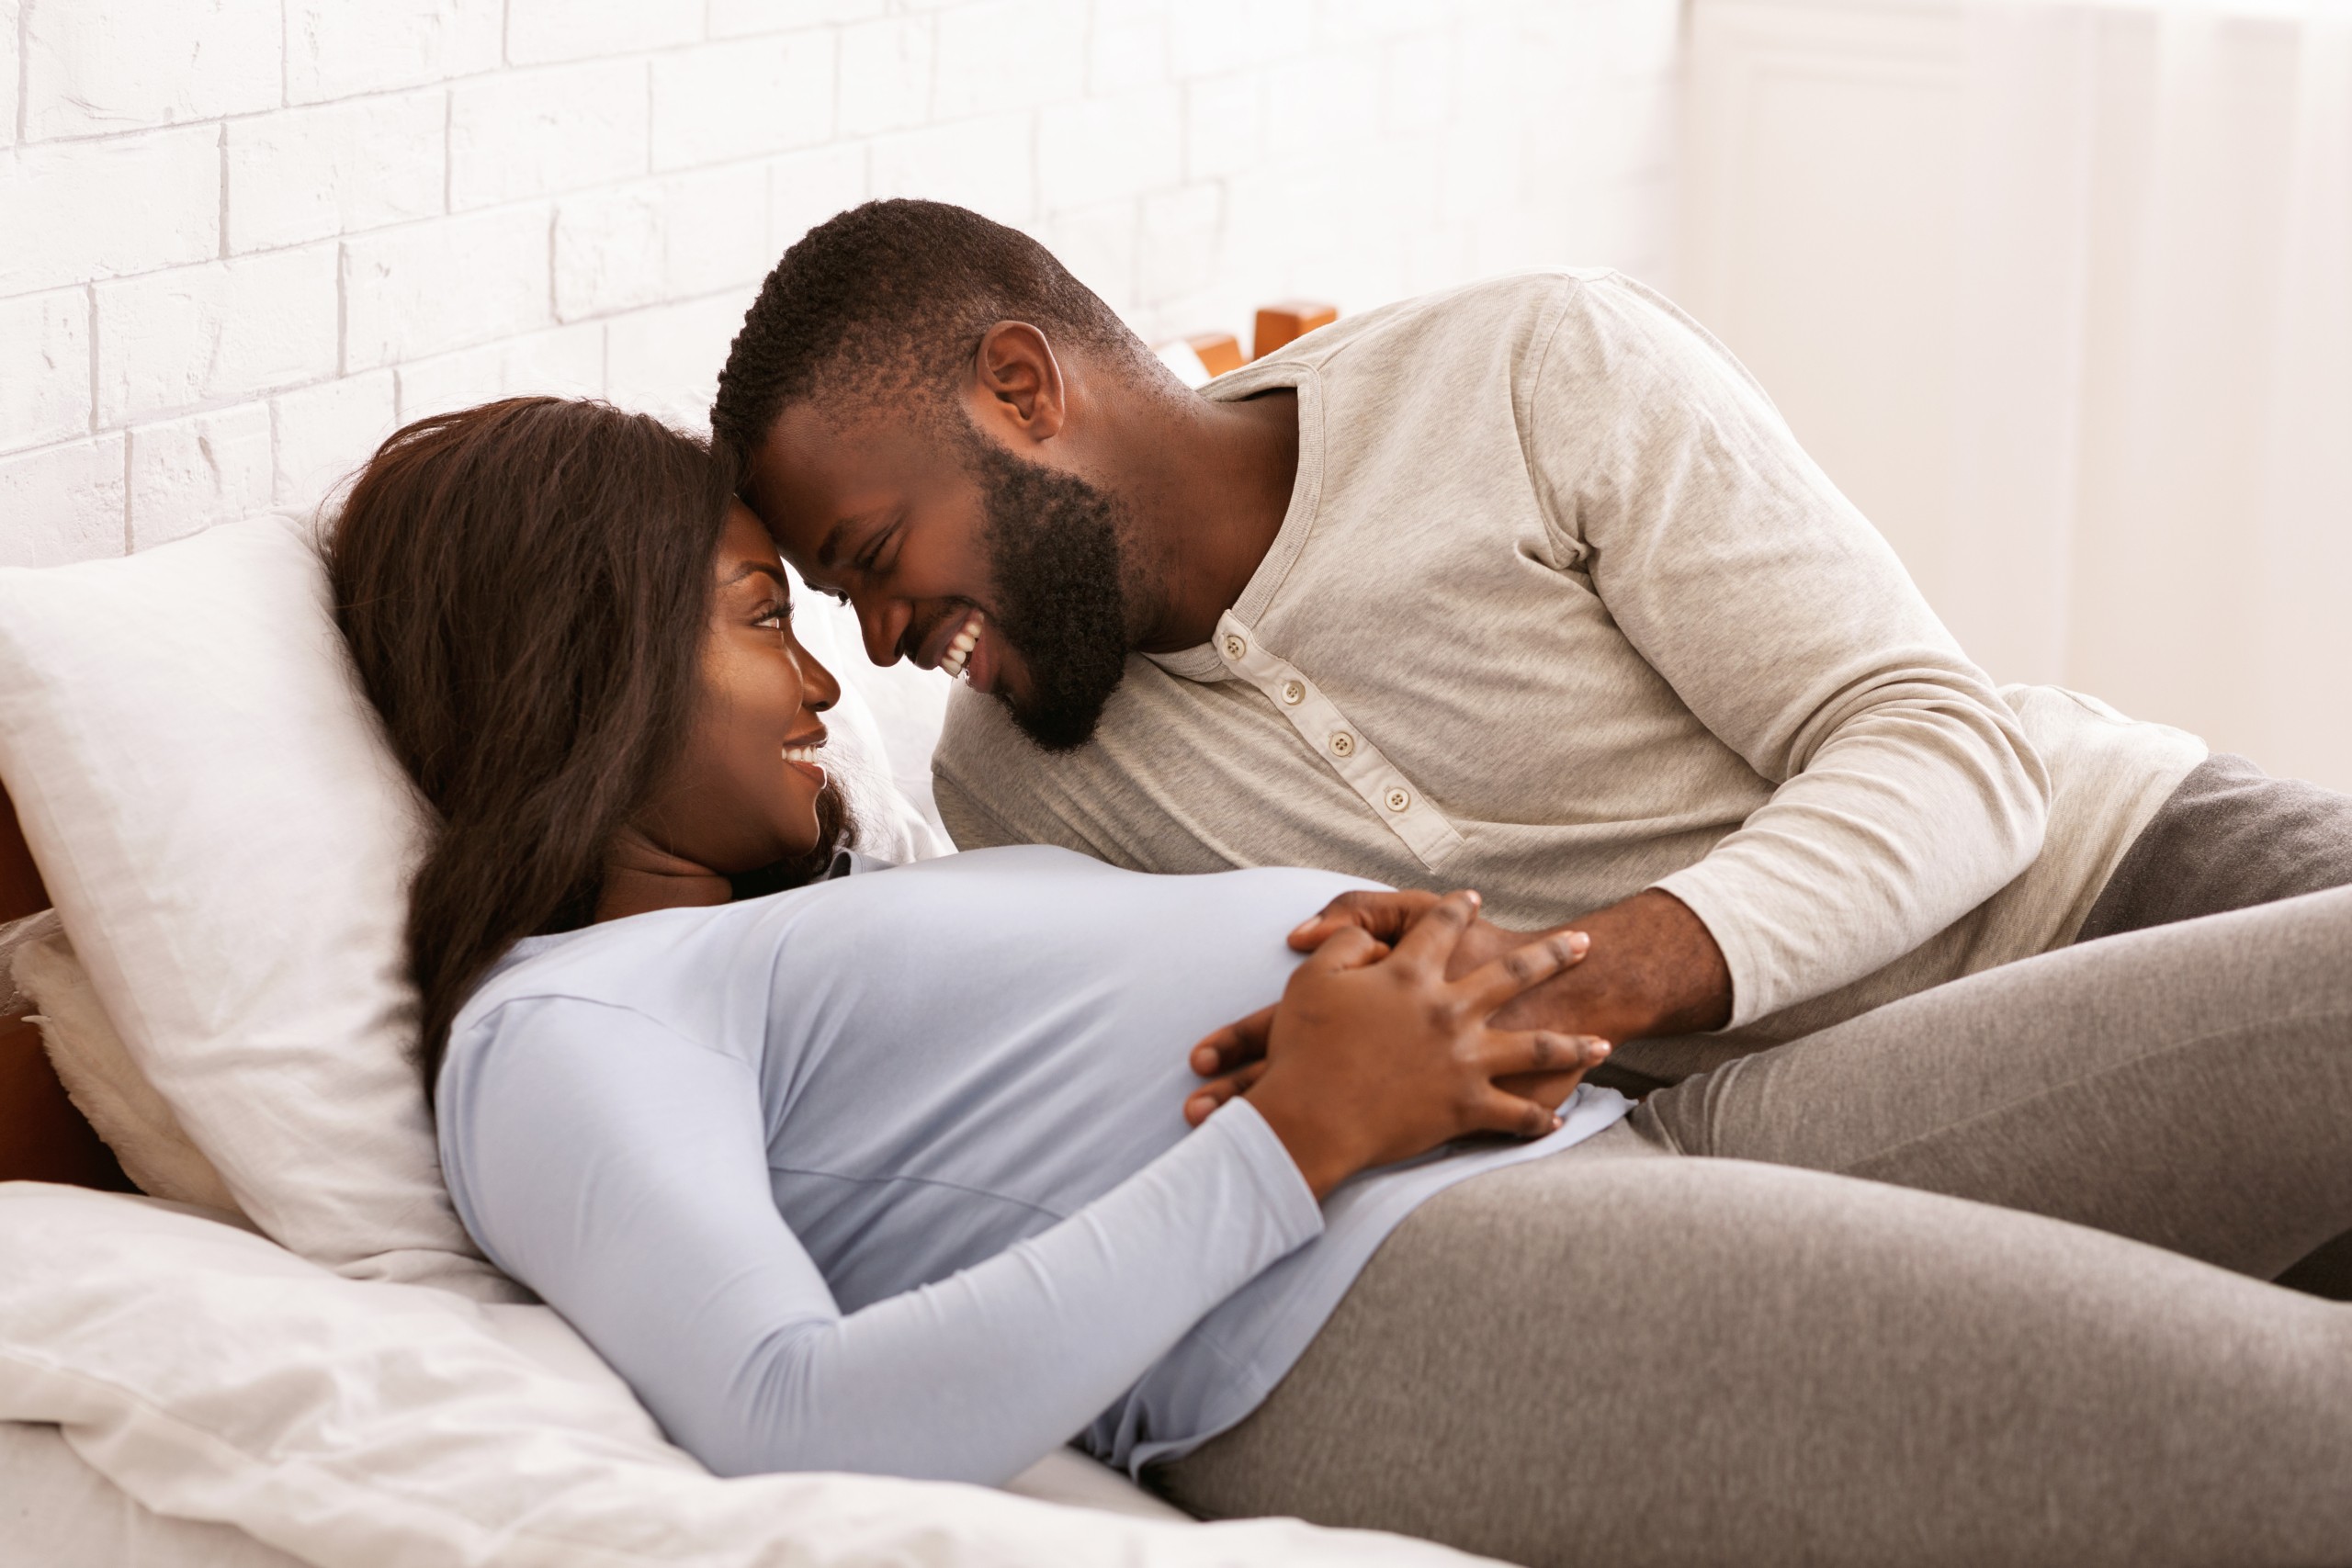 Can We Have Sex During Pregnancy?